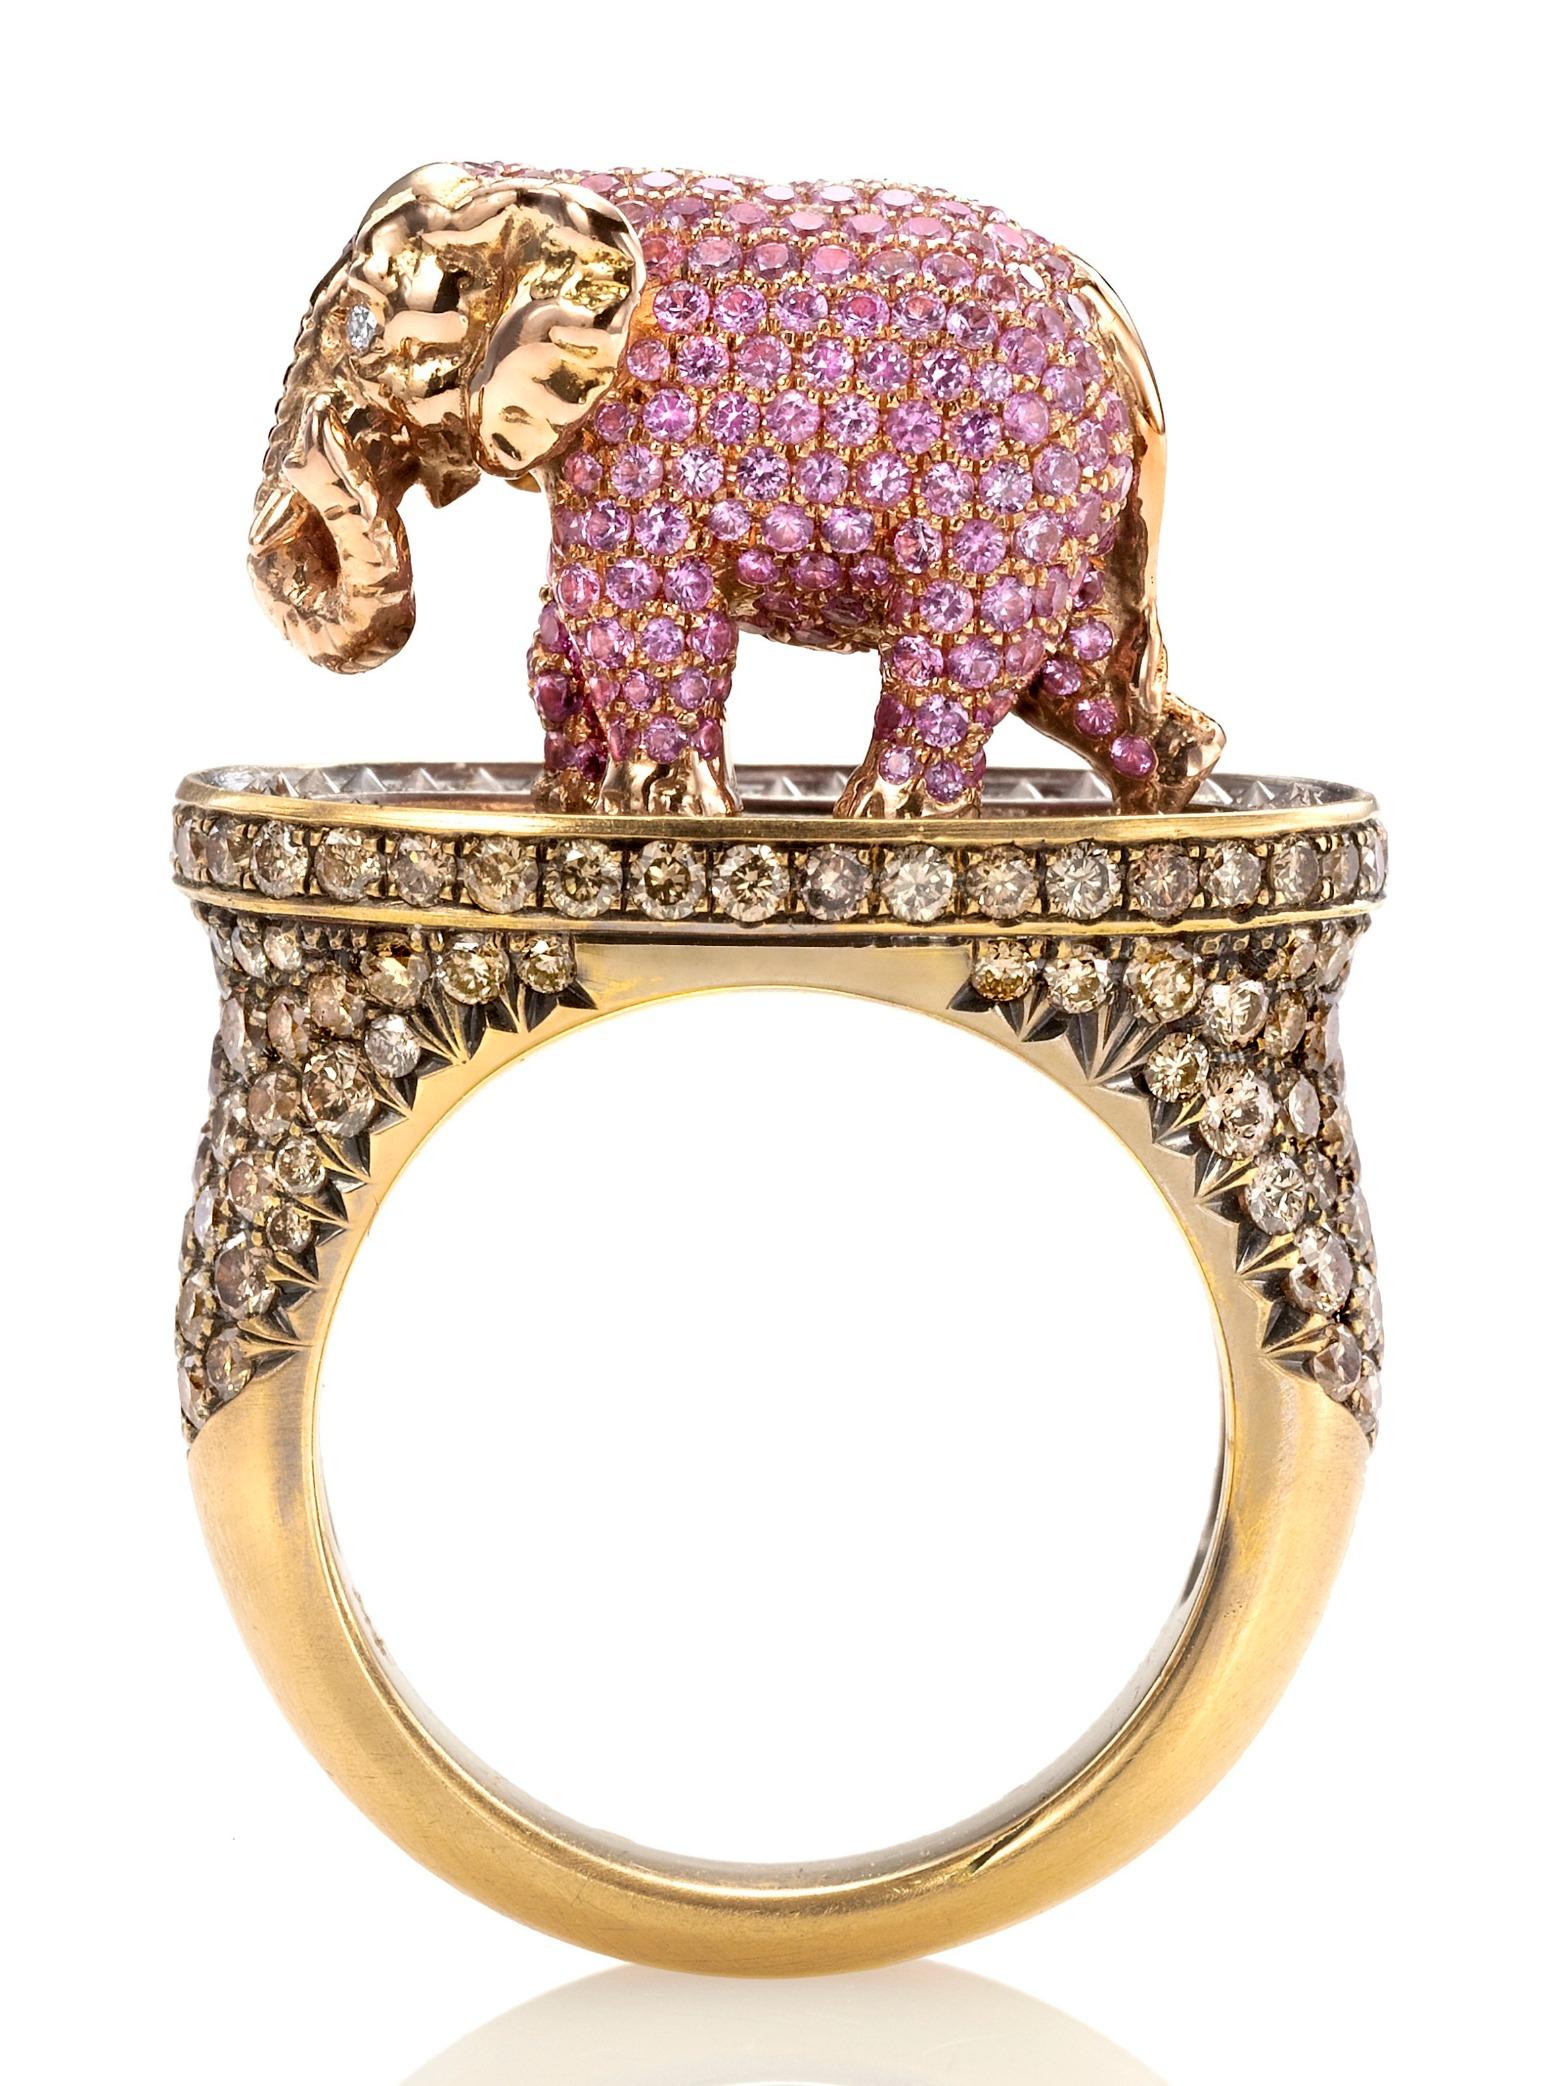 Wendy Brandes 7-Ring Diamond and Colored Gemstone Animal-Design Collection 6